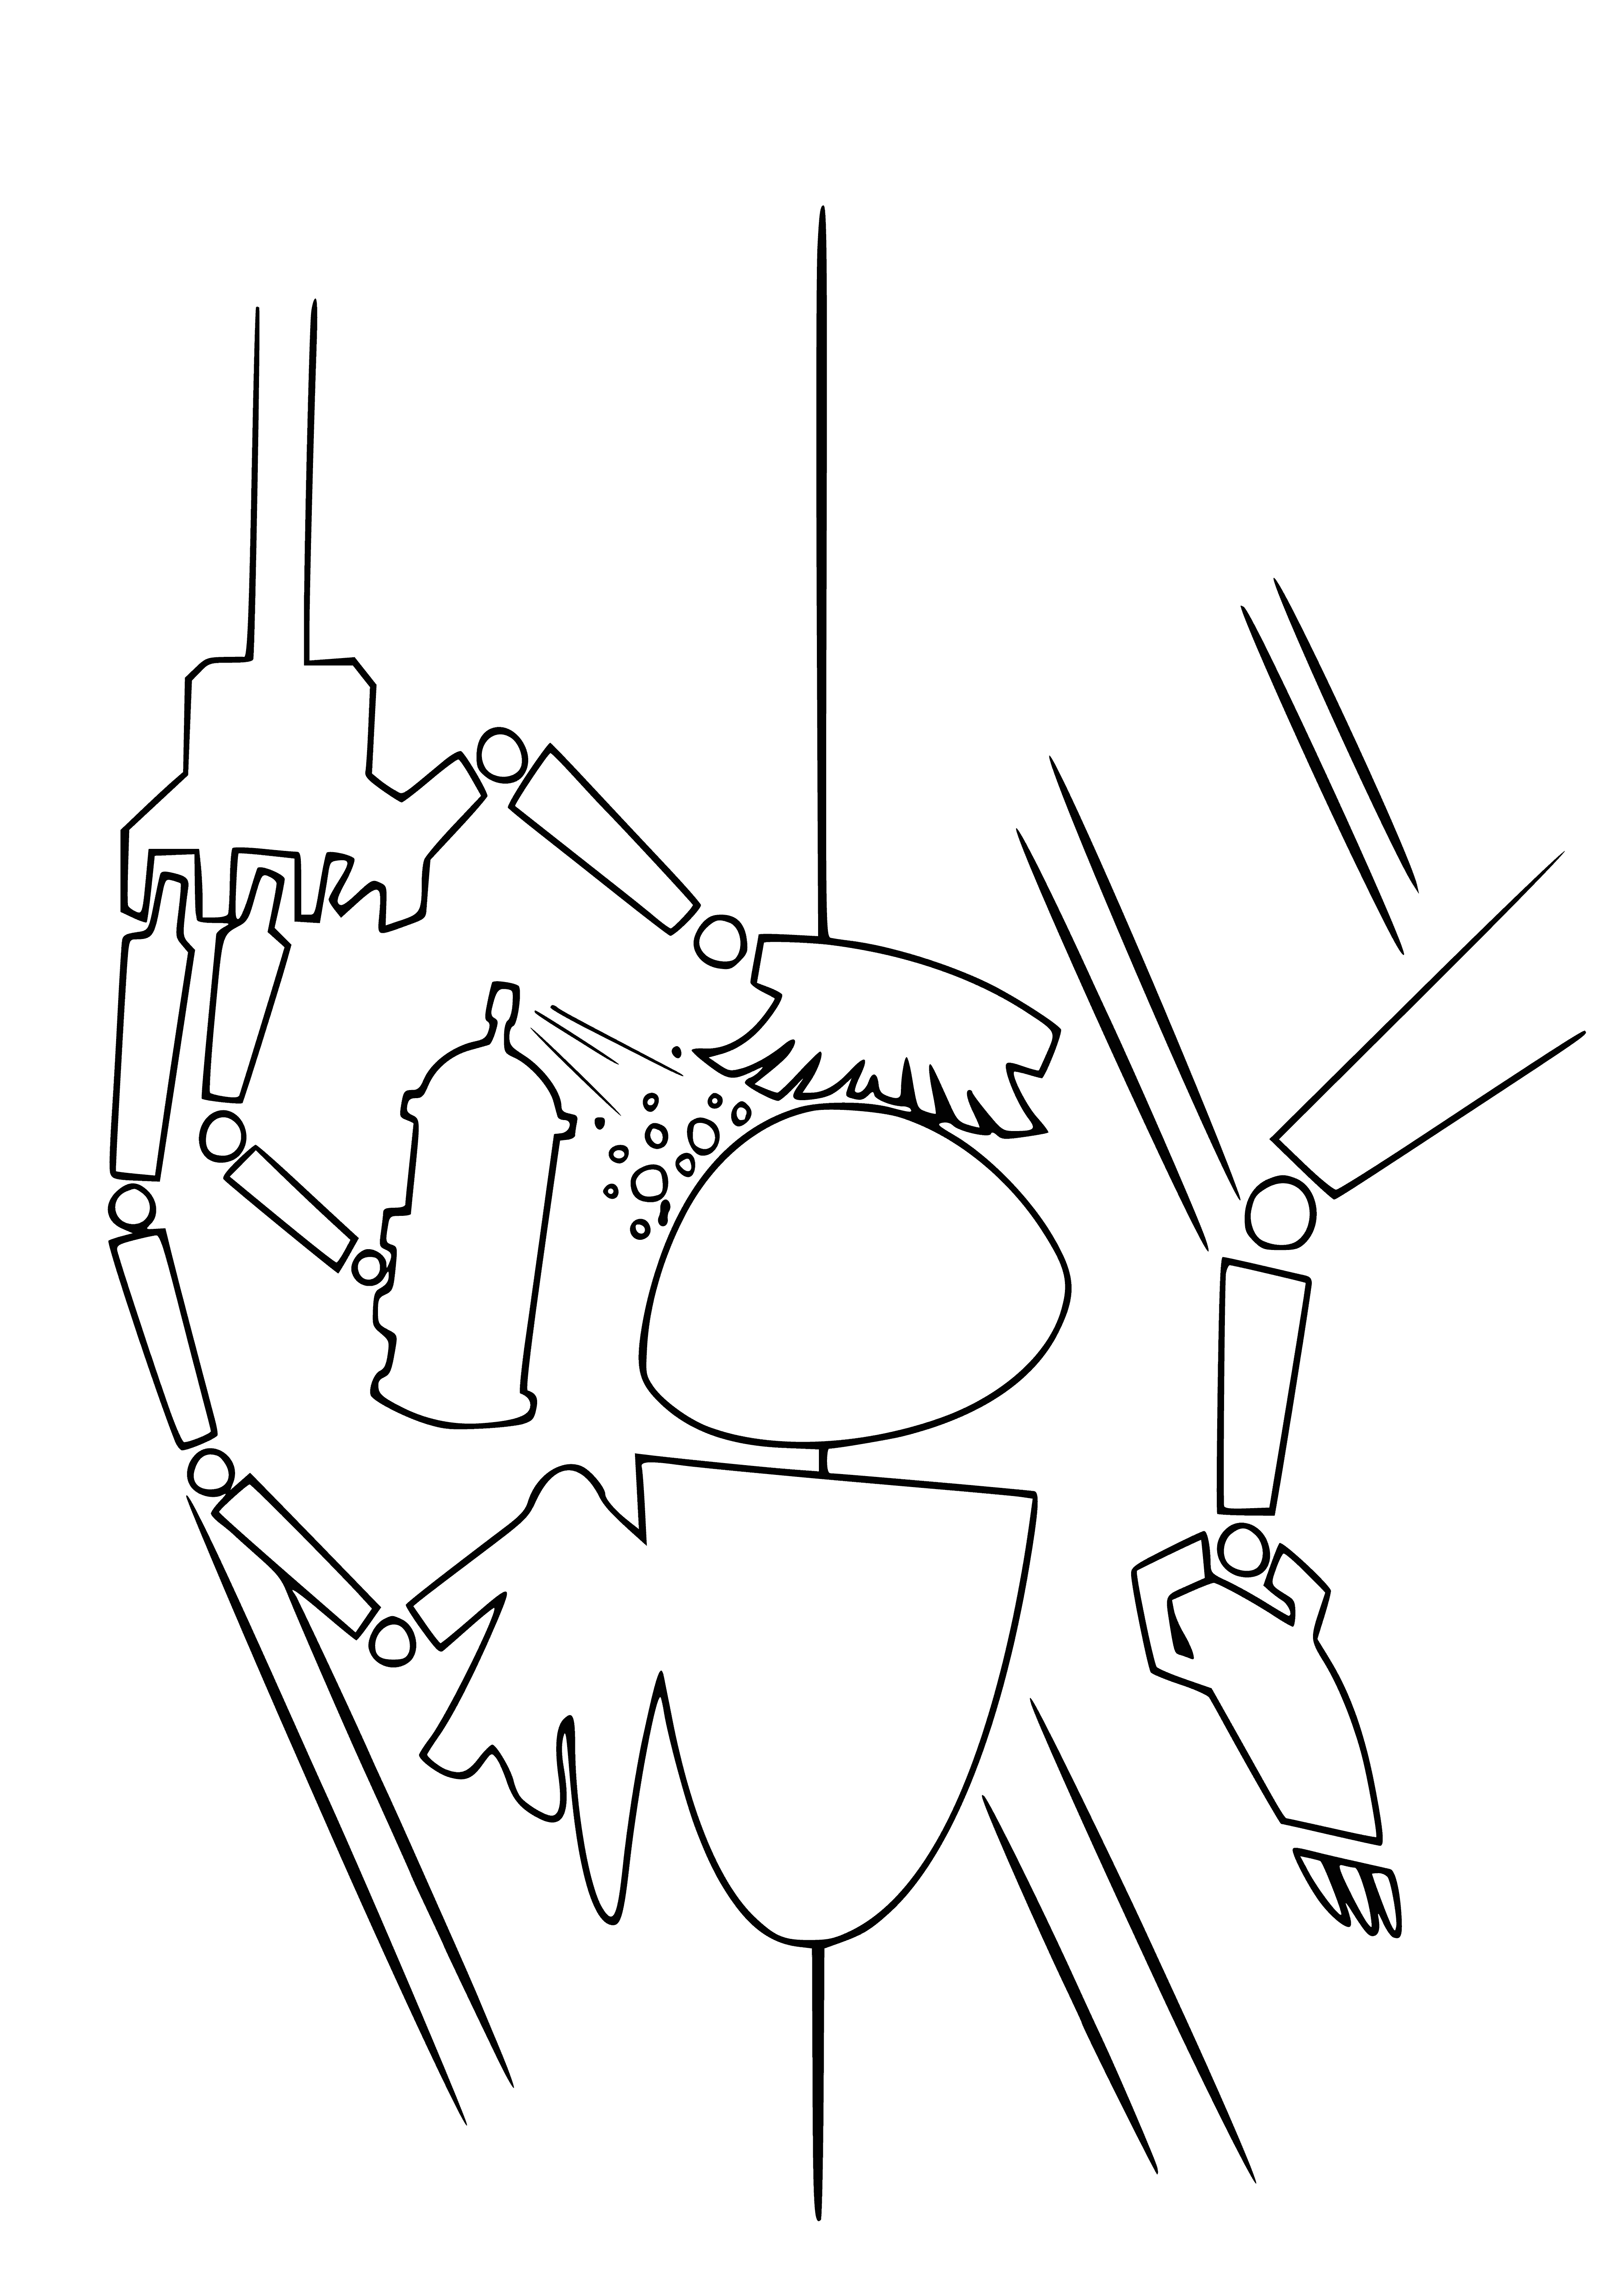 Washing, cleaning coloring page